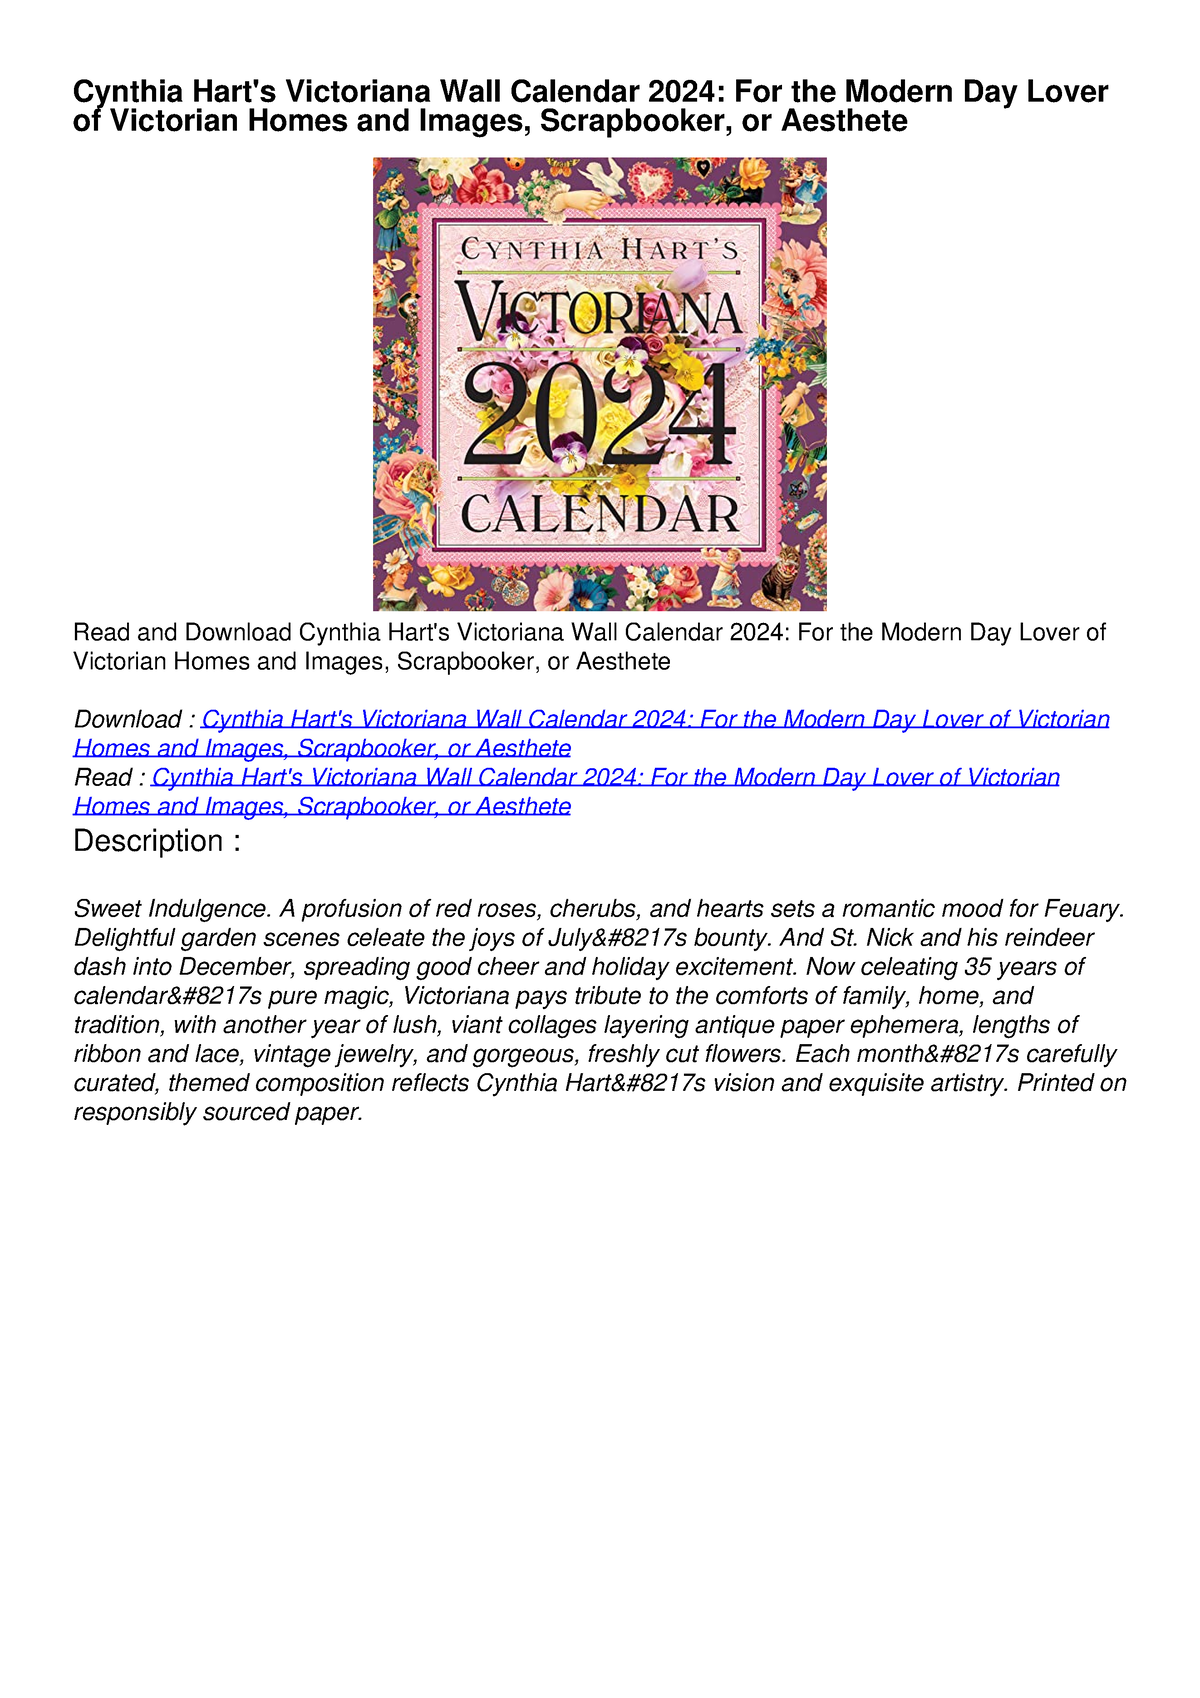 [PDF] DOWNLOAD Cynthia Hart's Victoriana Wall Calendar 2024: For the